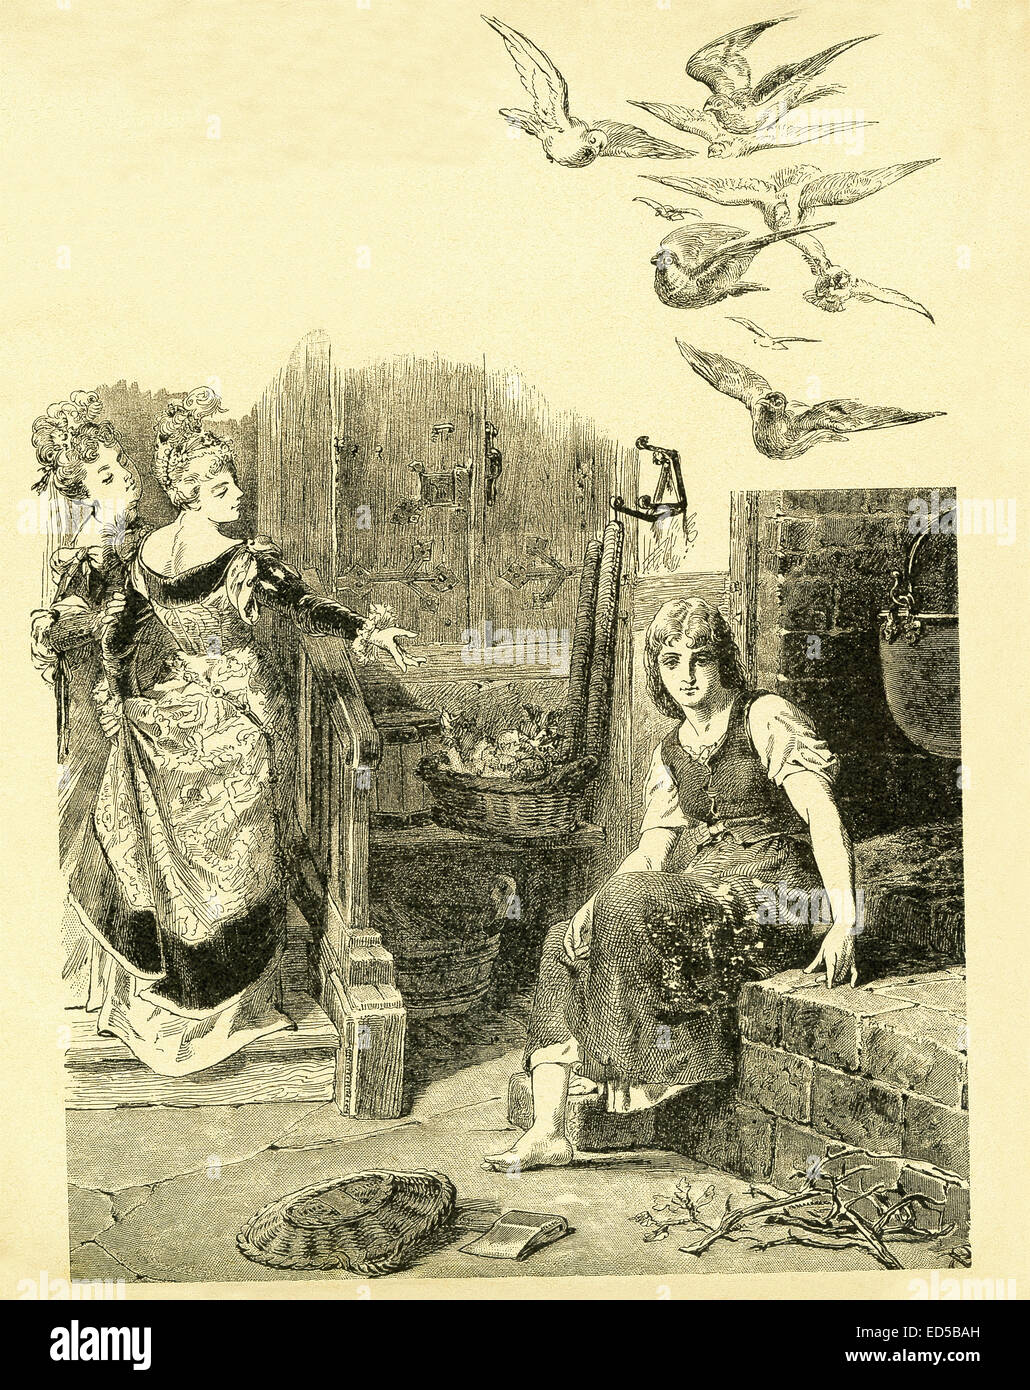 In 1812, the Grimm brothers, Jacob and Wilhelm, published Children and Household Tales, a collection German fairy tales. This illustration accompanied the tale 'Cinderella' and shows Cinderella being left by her stepsisters to do the housework. This image is from Grimms Eventyr (Grimm's Fairy Tales) by Carl Ewald, published in 1922. The frontispiece has the illustrations by Philip Grot Johann and R. Leinweber. Johann was a well-known German illustrator and did pieces for Goethe, but he considered his pieces for Grimm's tales very important. He died young and Leinweber succeeded him as illustra Stock Photo